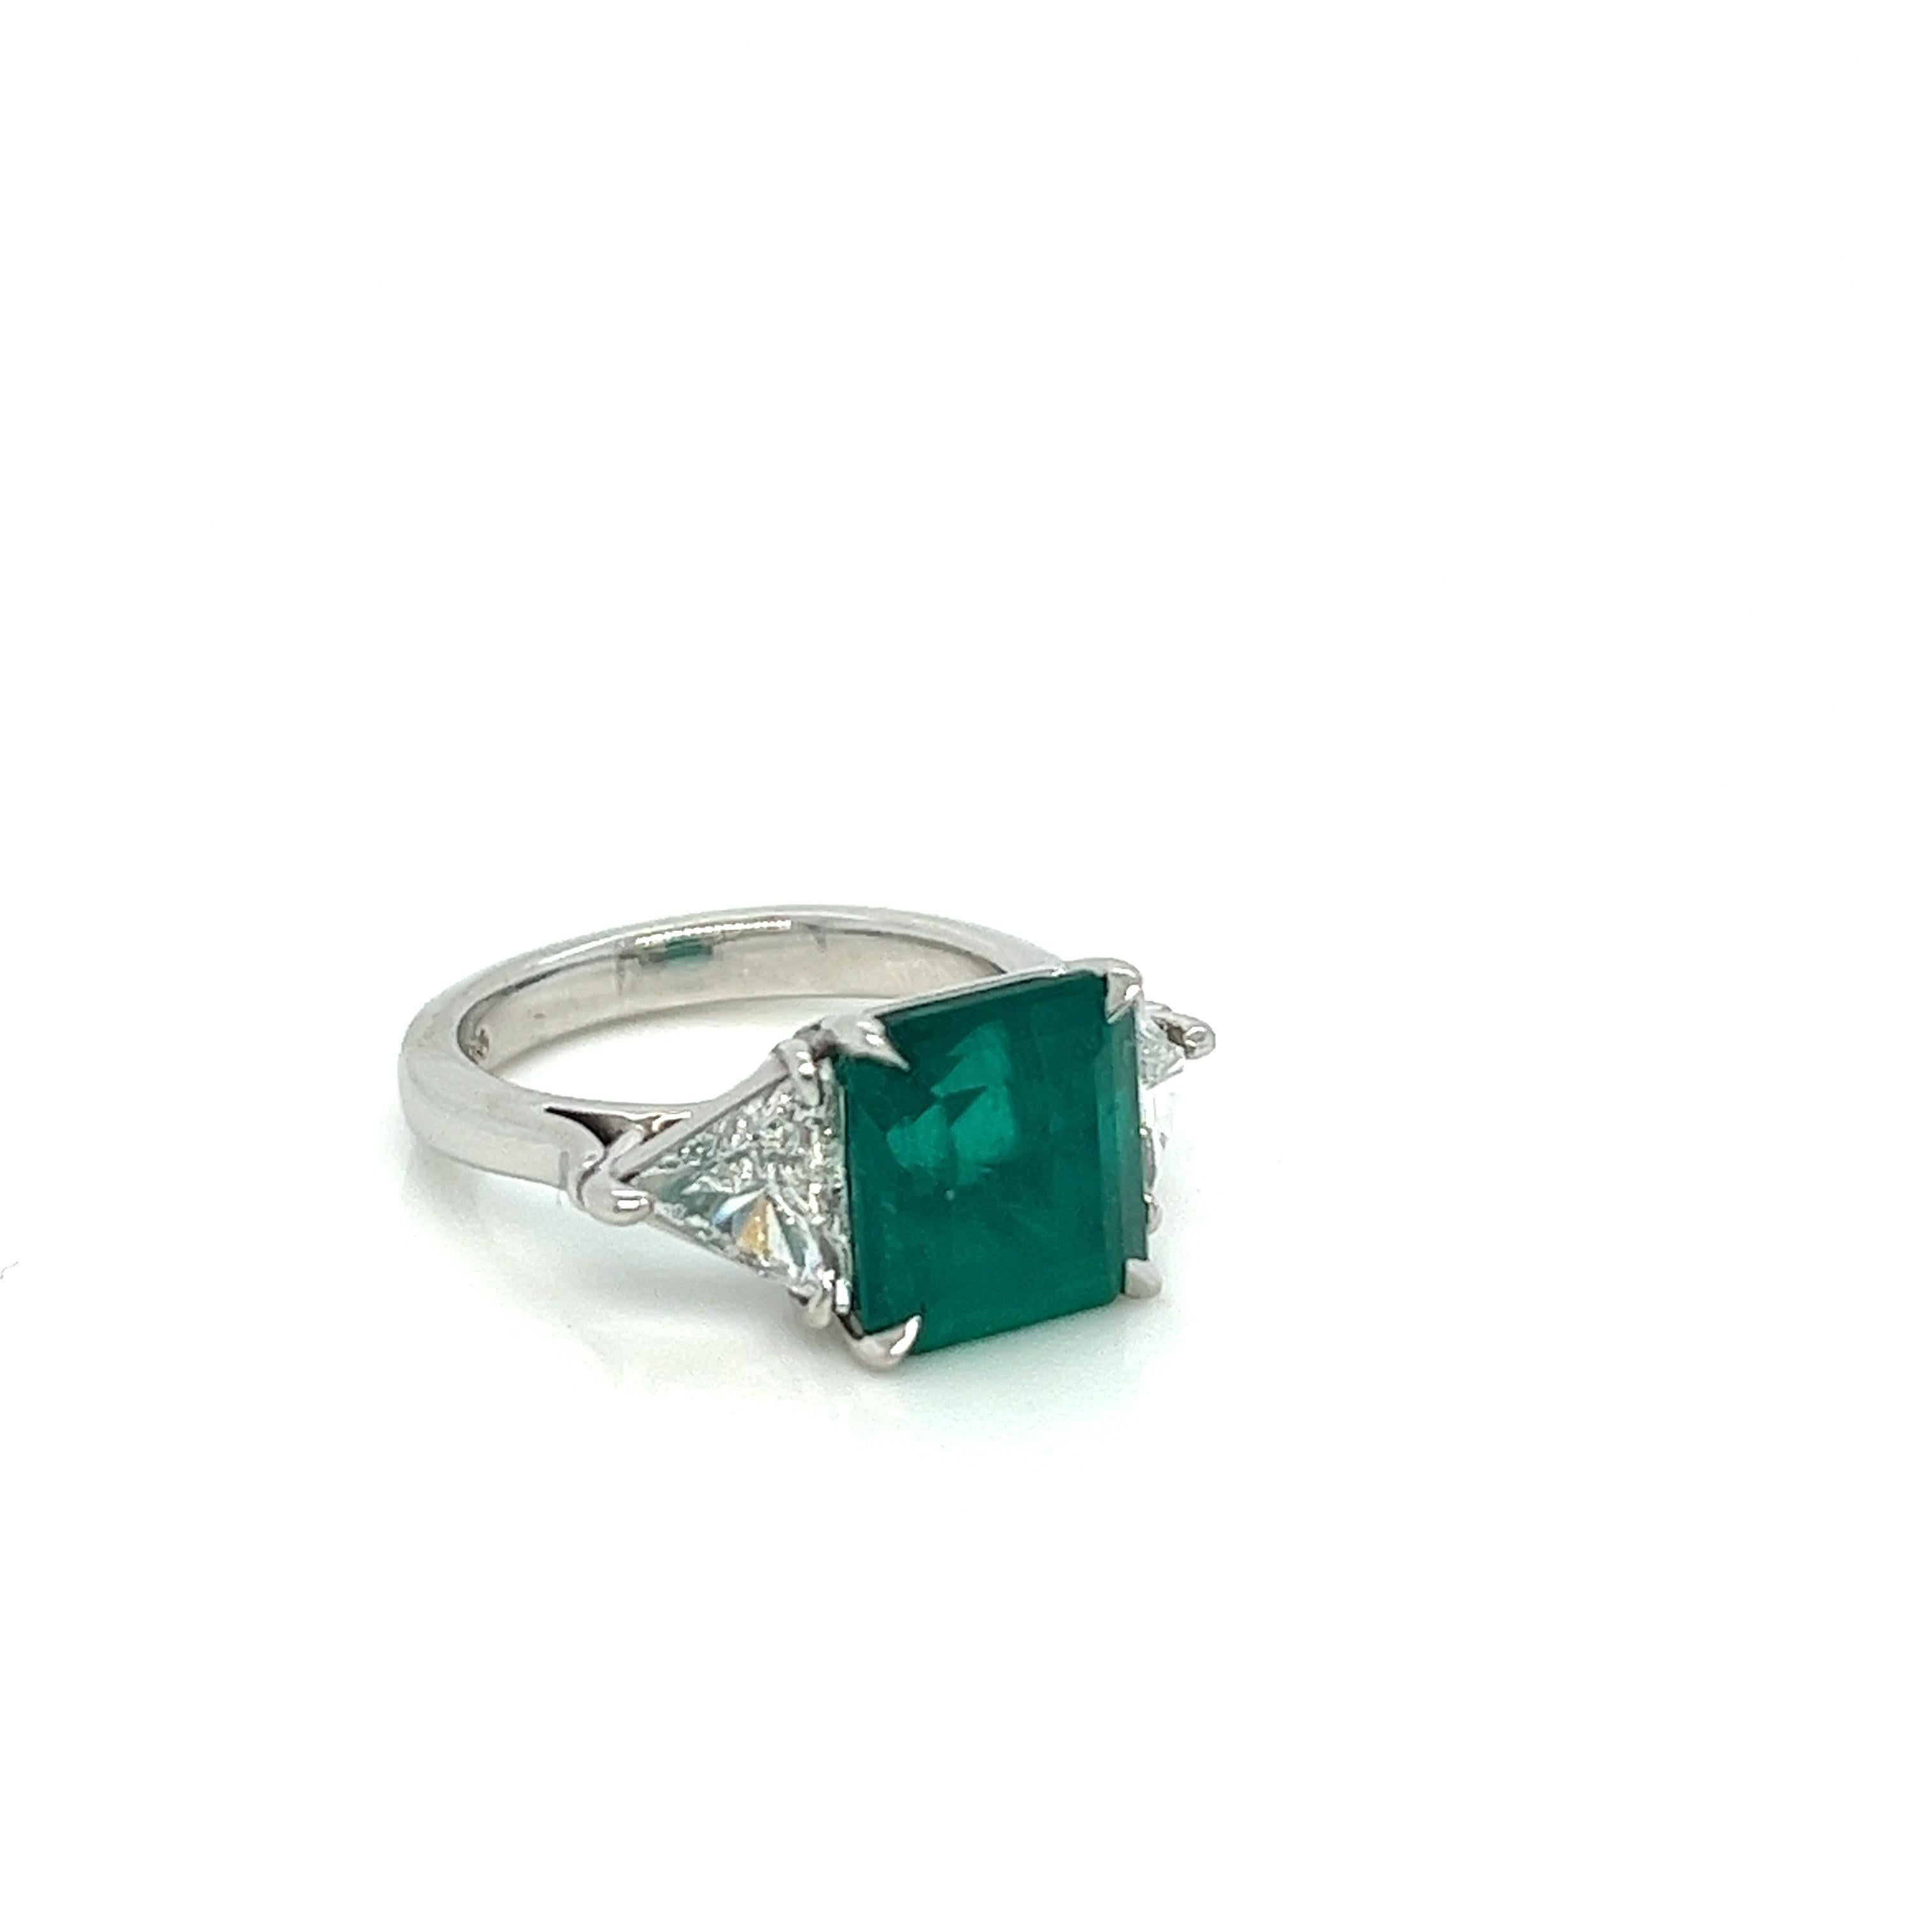 We couldn't help but say that this cocktail estate ring screams green with envy! The classic three stone design is centered by a 4.10 carat Colombian emerald graded by GIA. It's amazing rich green color just pops against the two super white (F